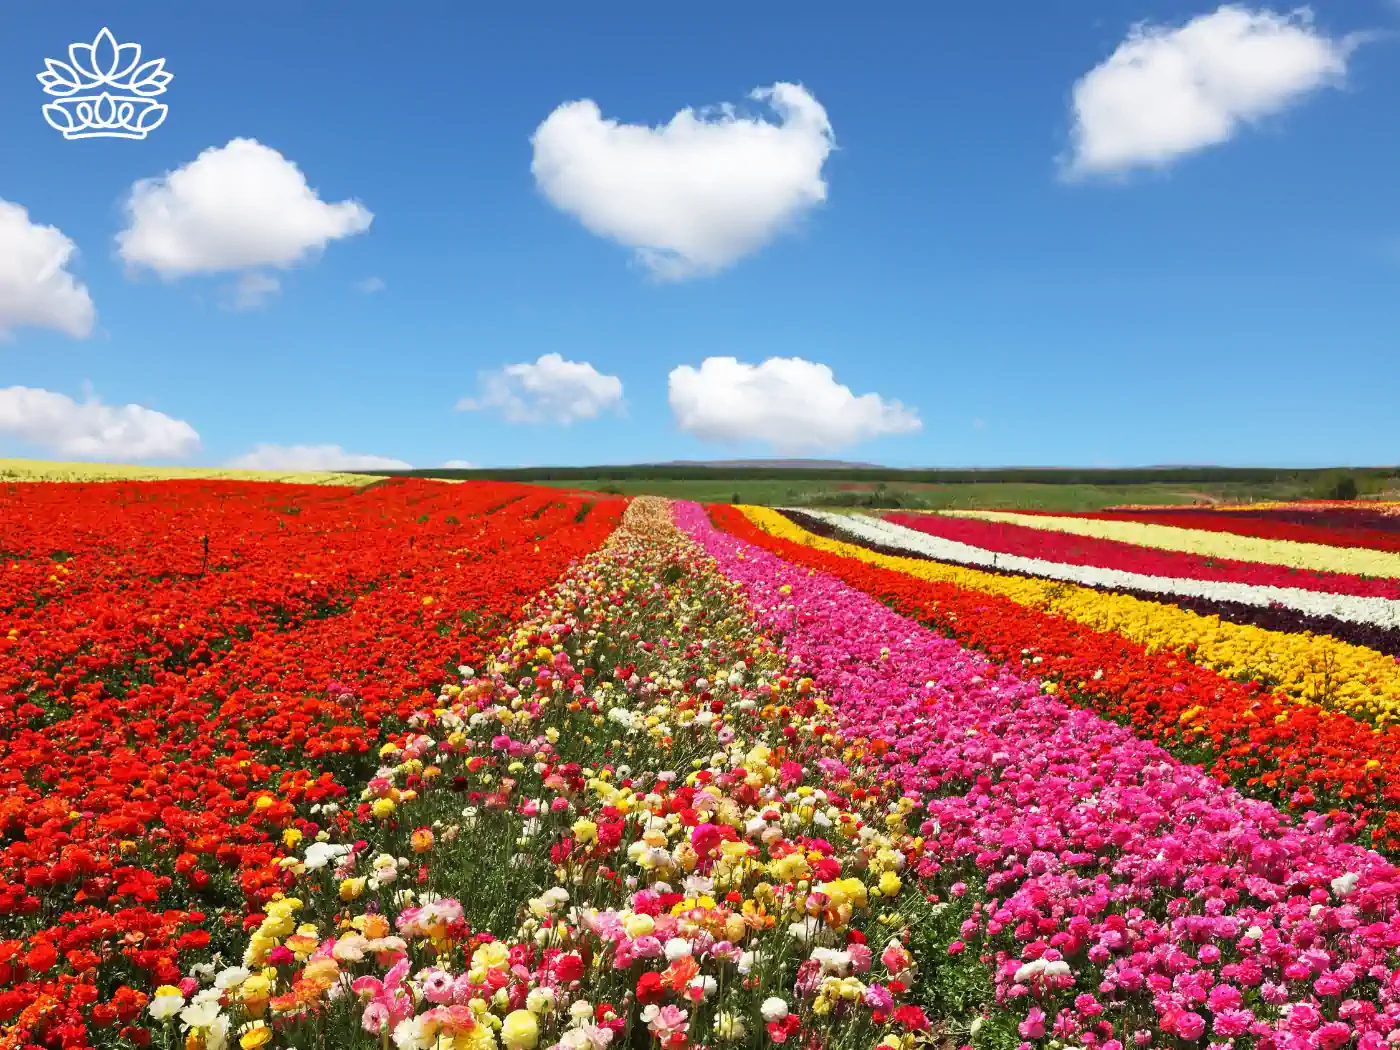 Stunningly vibrant rows of red, yellow, and pink flowers create a vivid tapestry against a blue sky with fluffy white clouds, celebrating the rich diversity of floral beauty. Fabulous Flowers and Gifts: Flower Arrangements Under R500, Delivered with Heart.